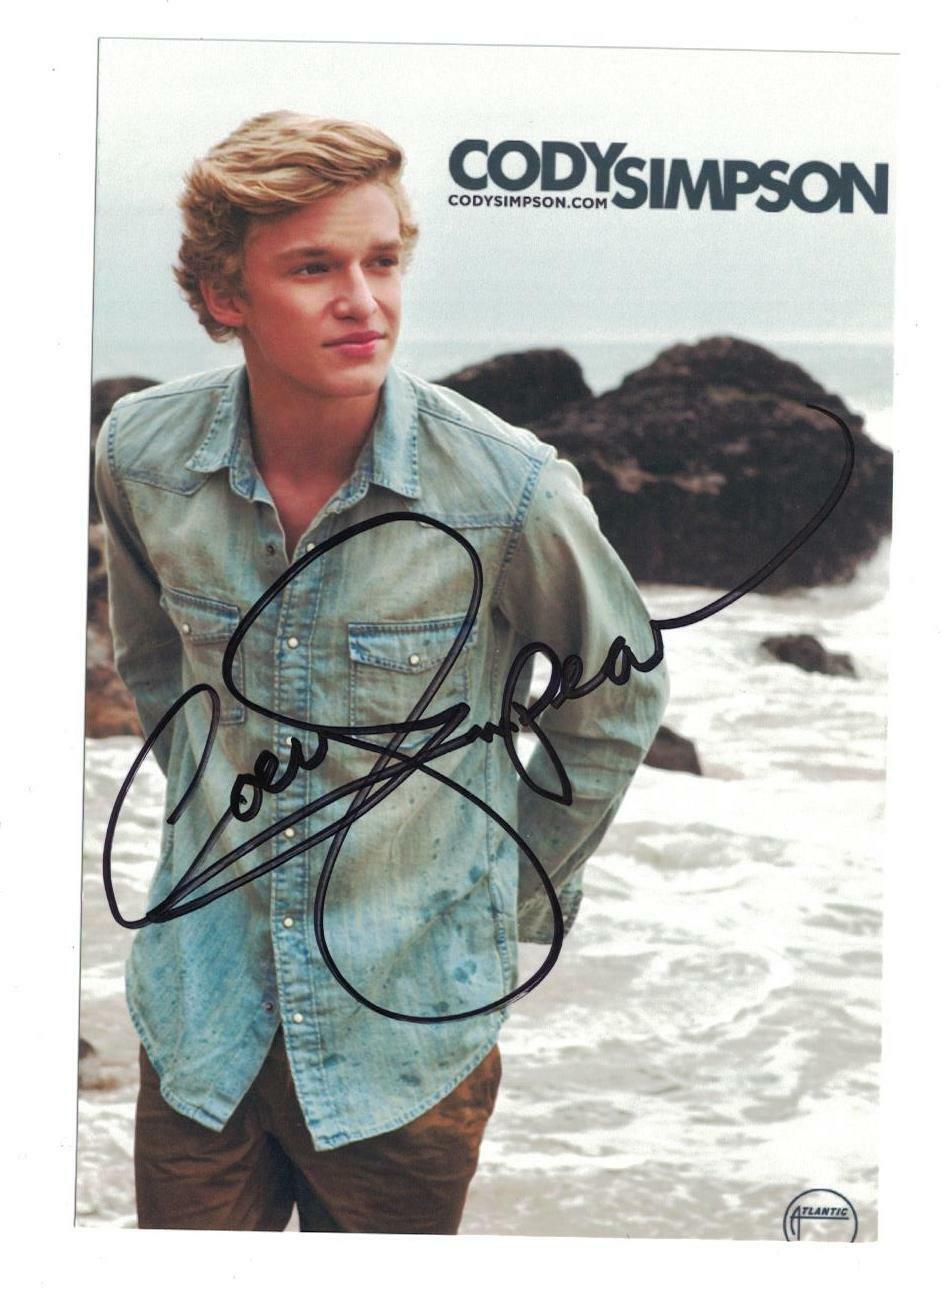 Cody Simpson Signed Autographed 4 x 6 Photo Poster painting Actor Singer Model Rare B